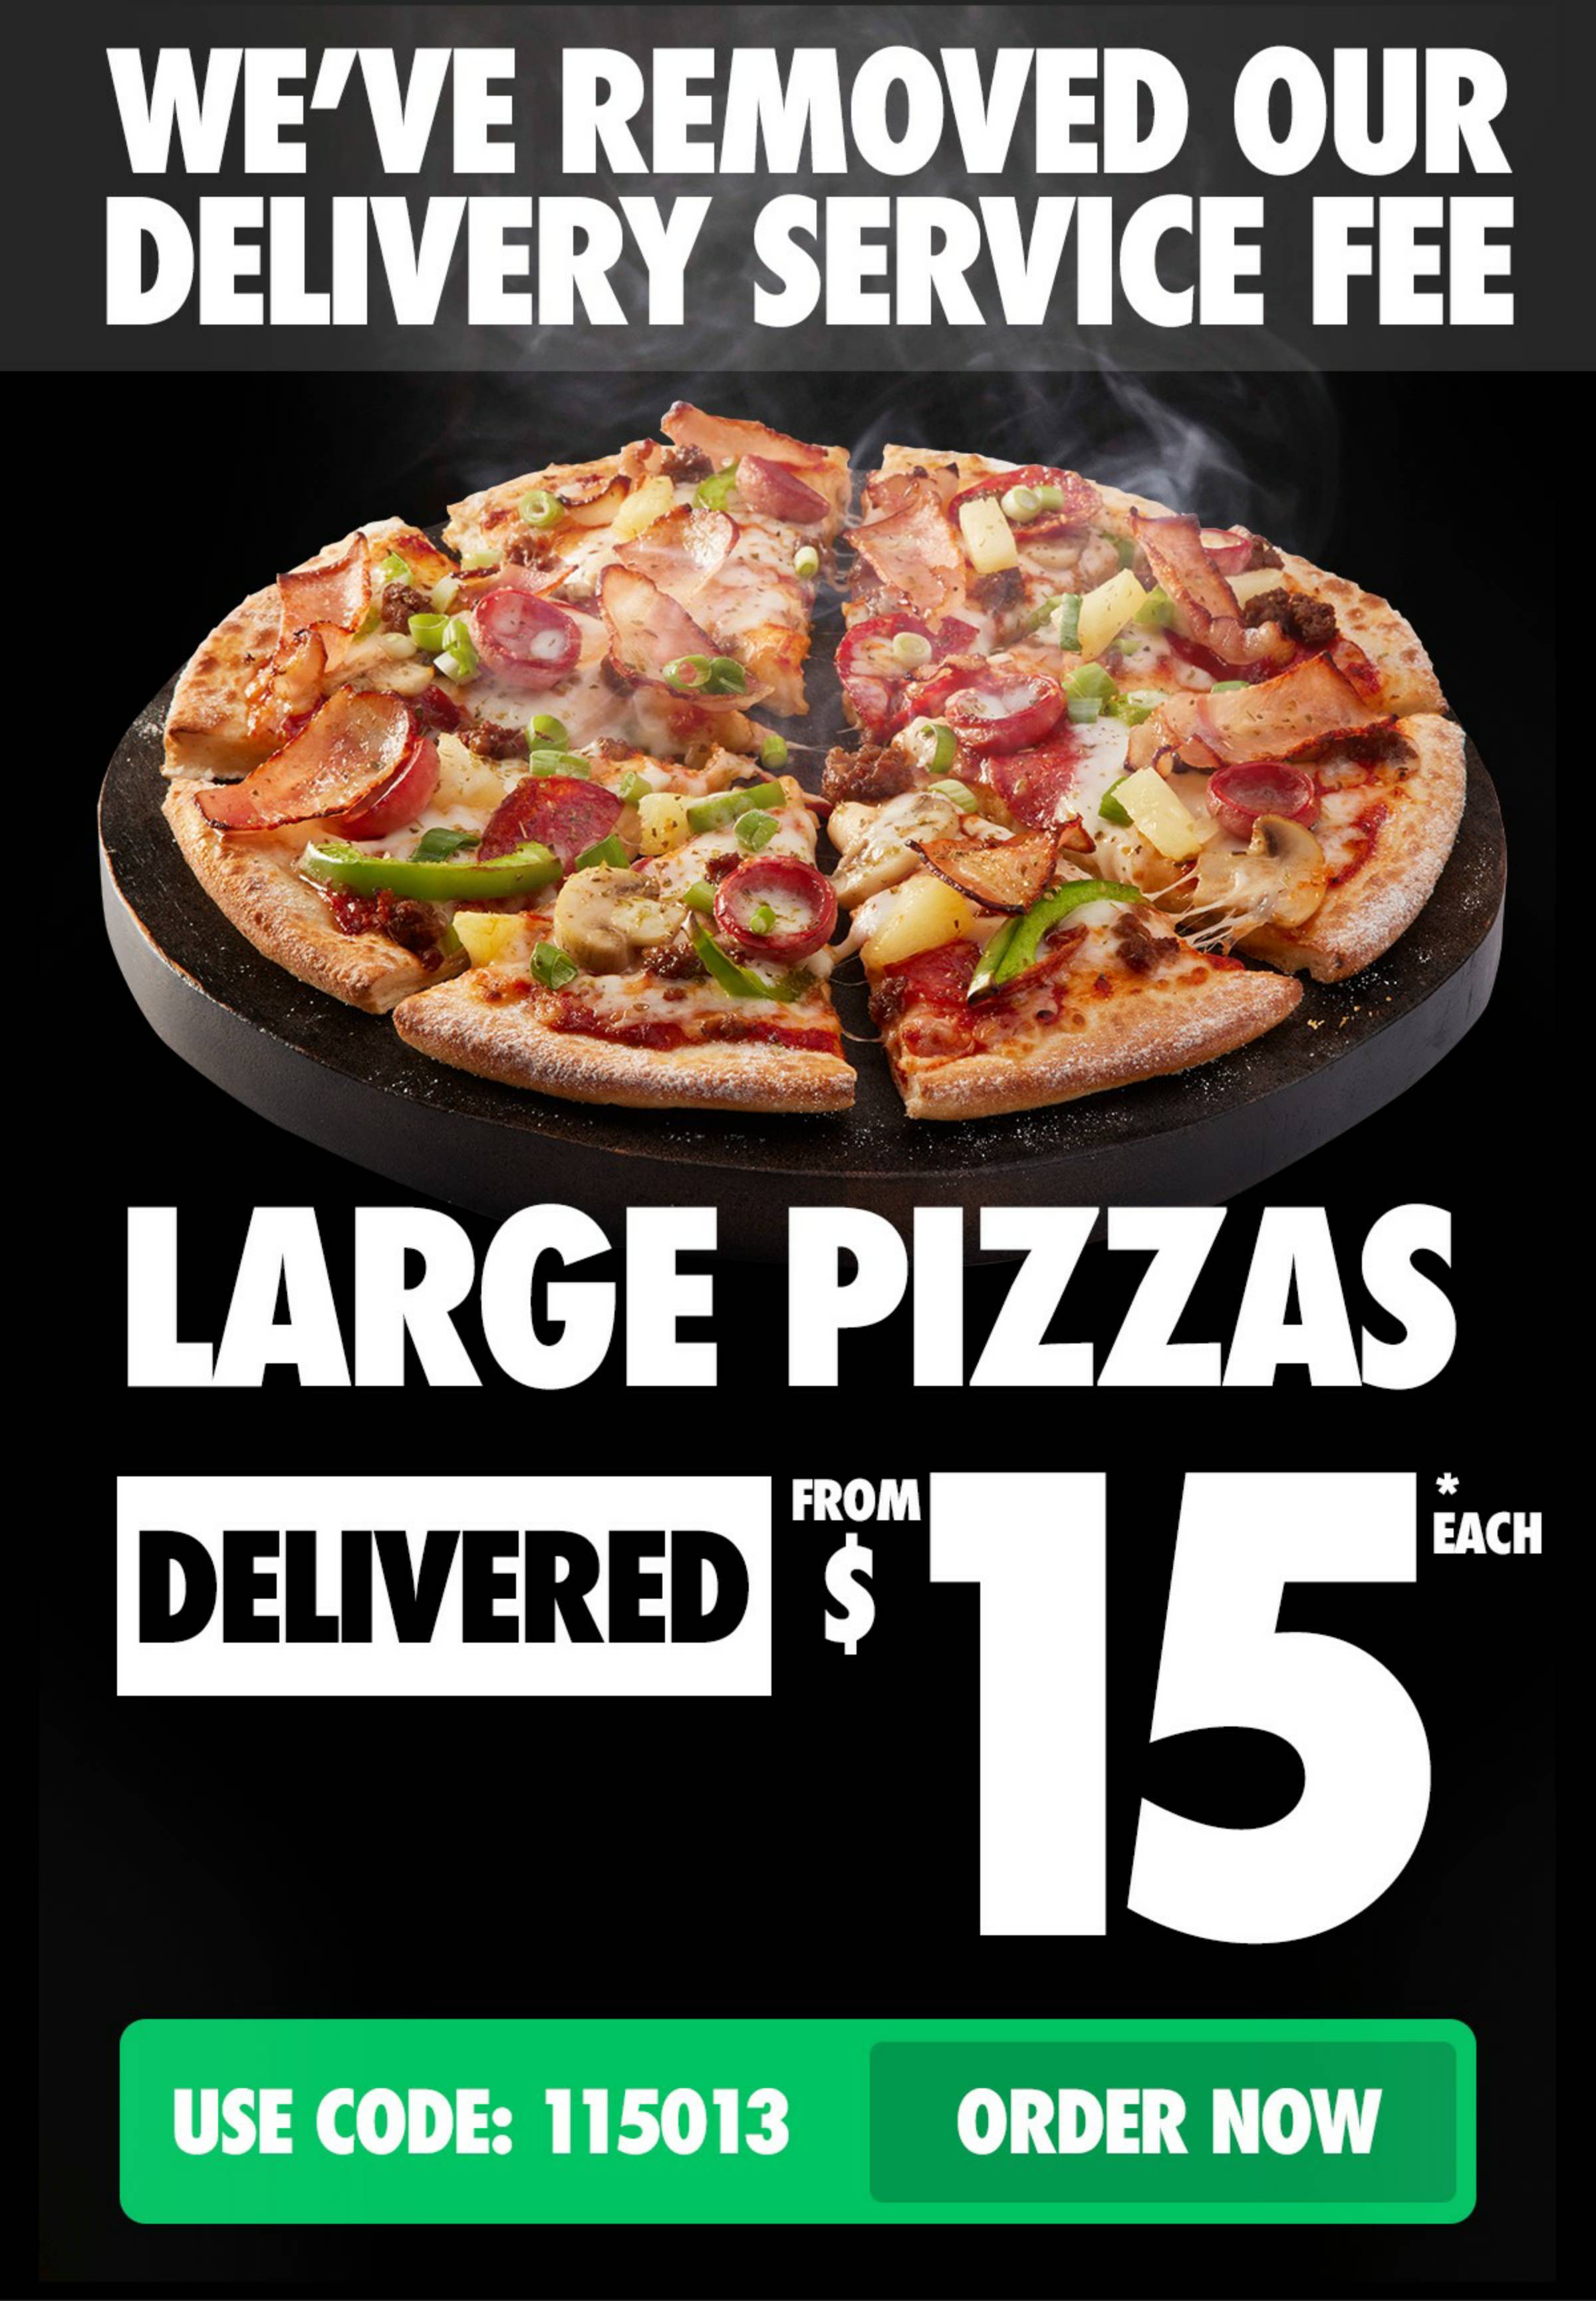 Domino's - Large Pizzas Delivered from $15